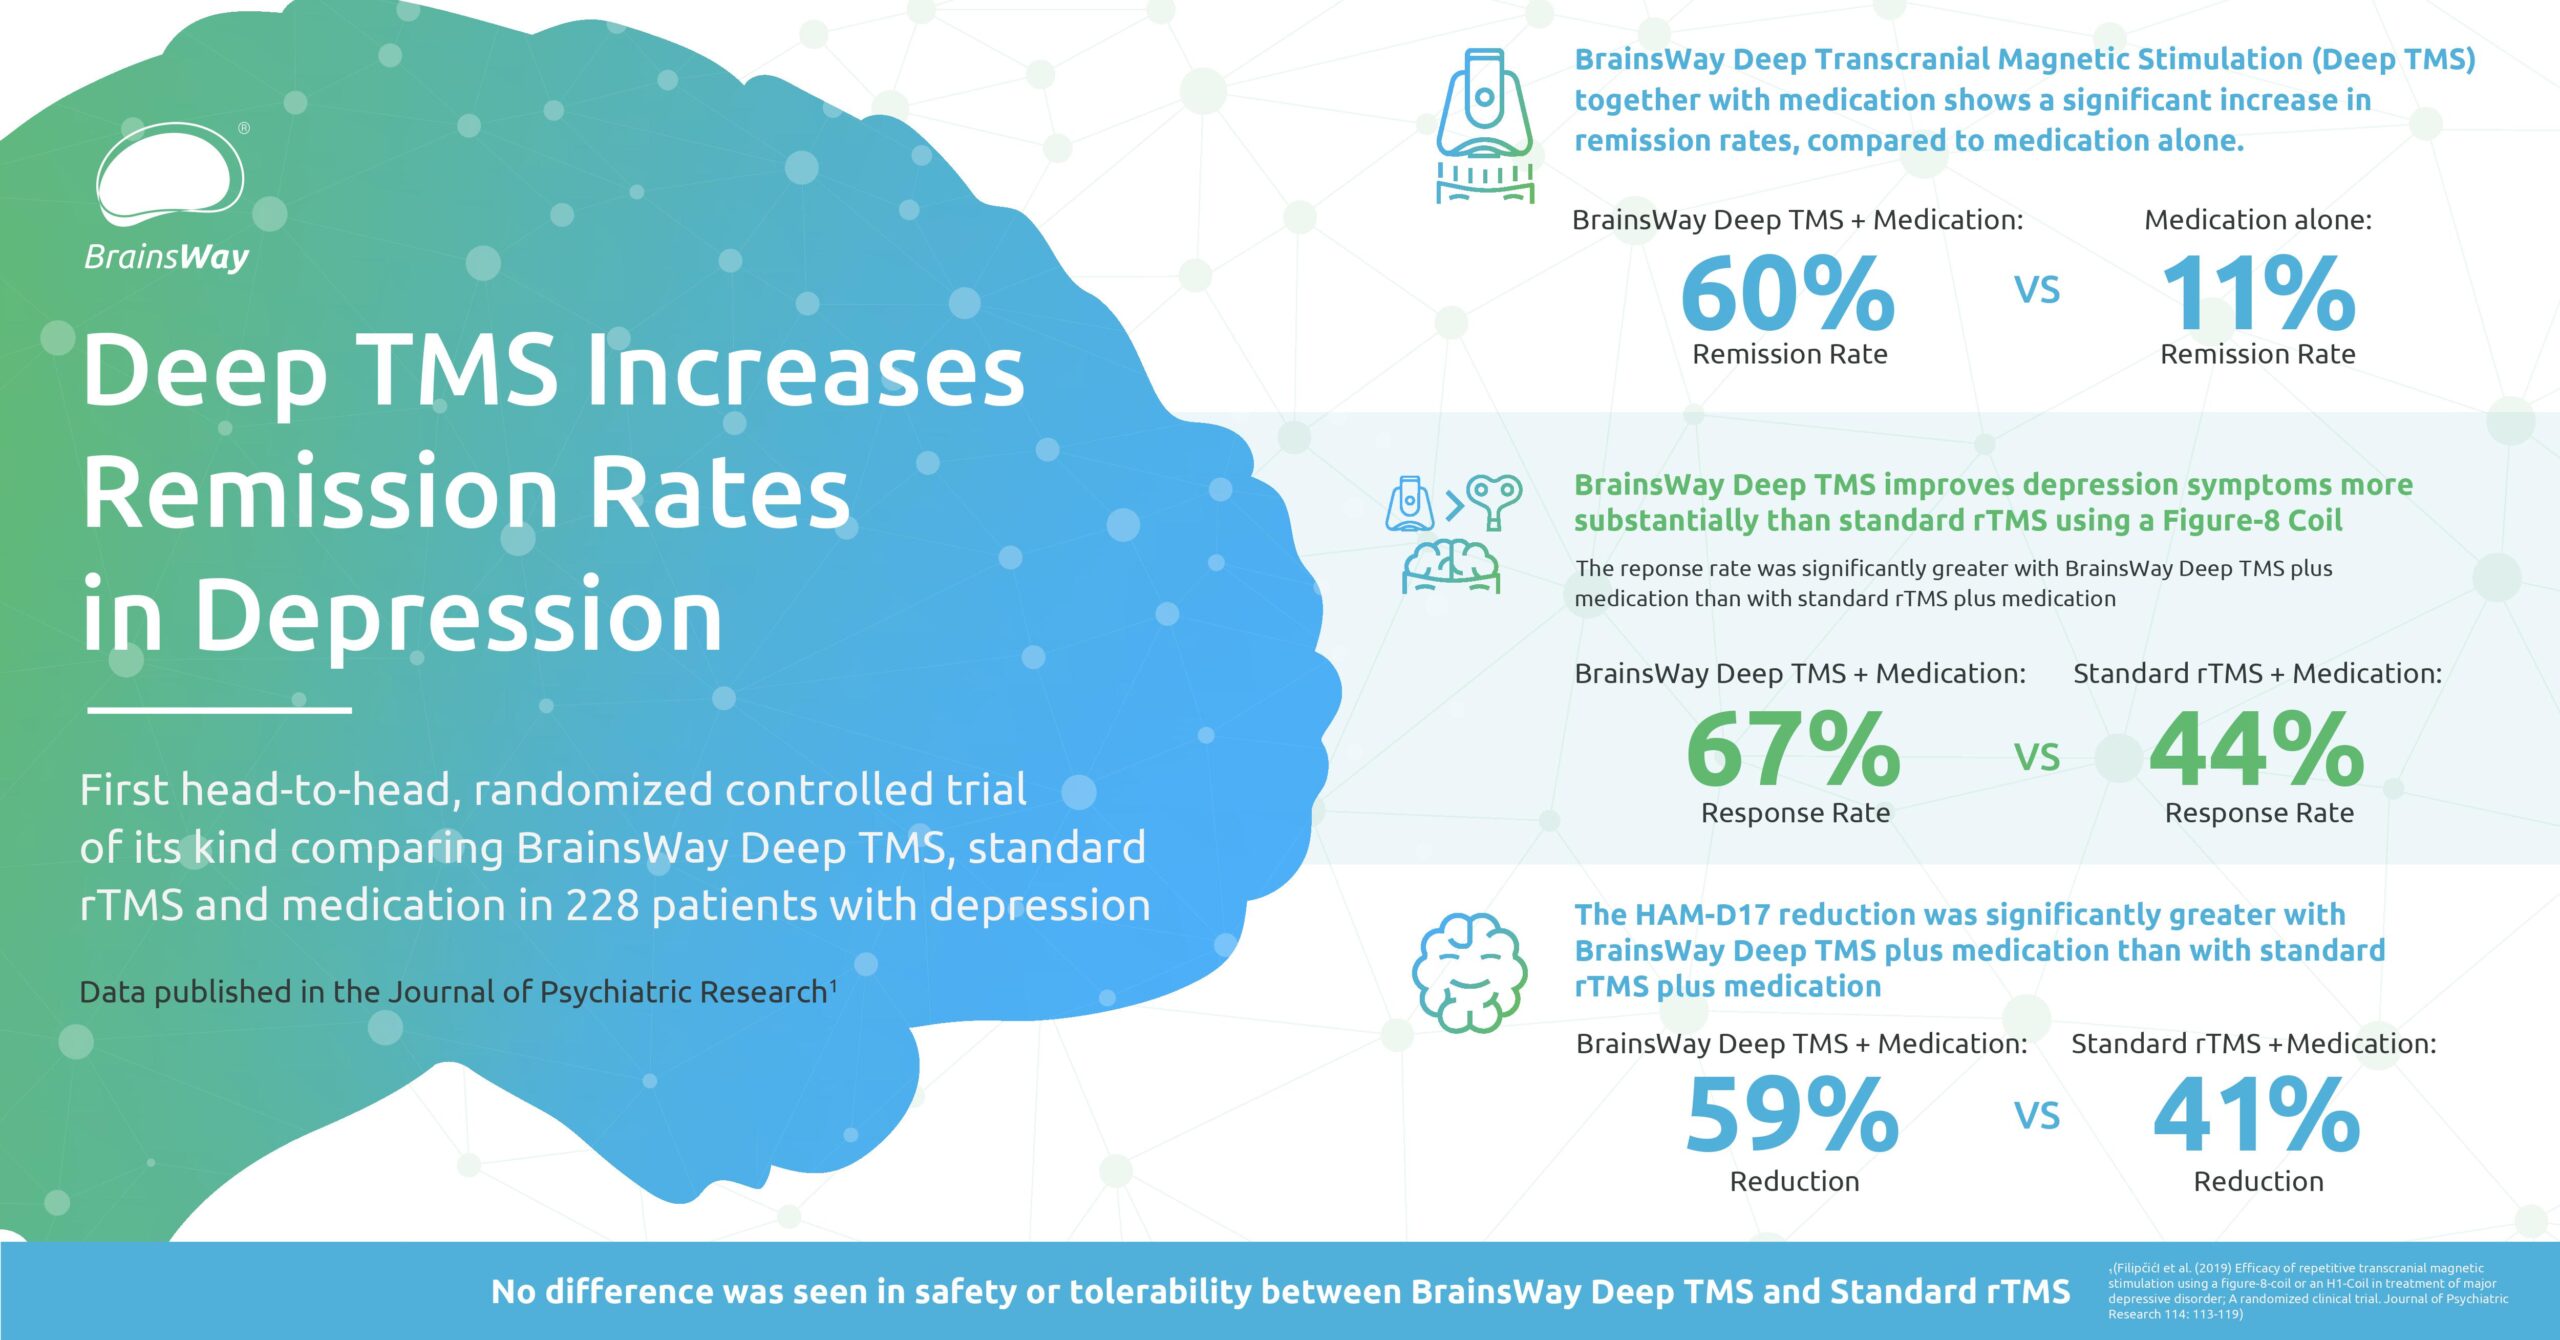 Infographic describing how Deep TMS increases remission rates in depression compared to standard rTMS and medication alone.